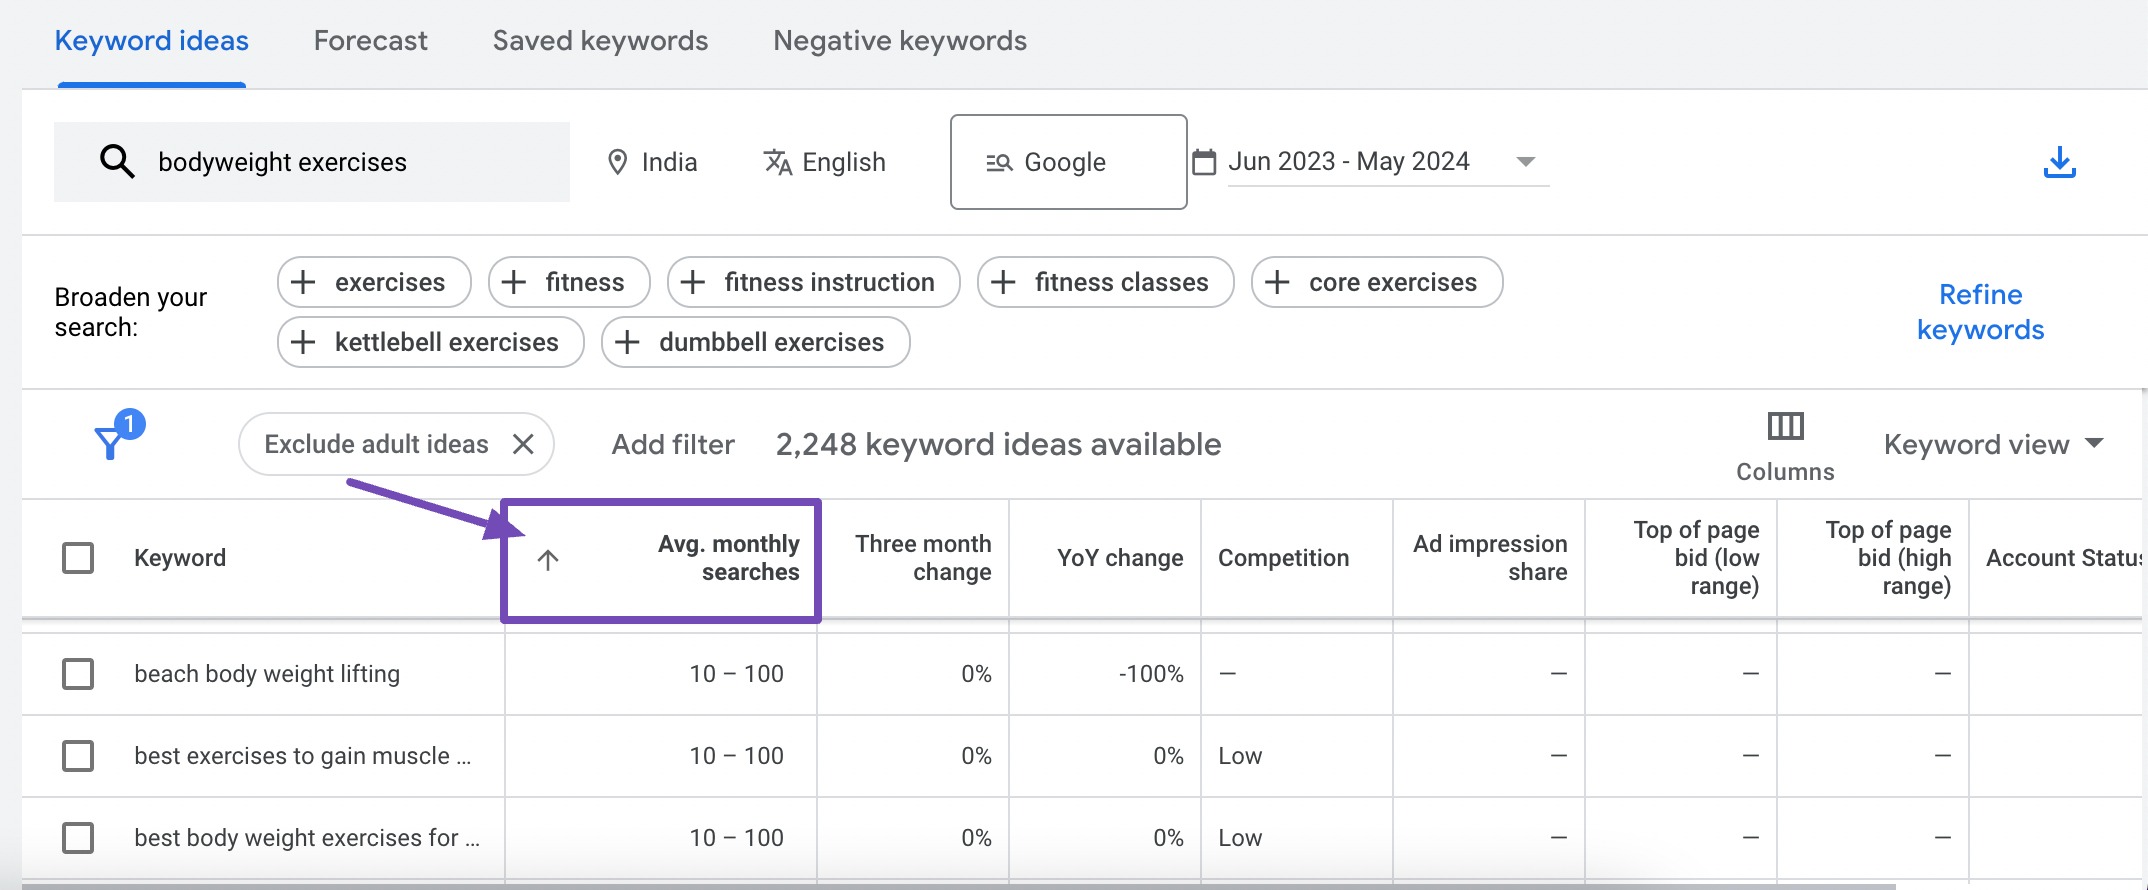 Average monthly searches in Google Keyword Planner